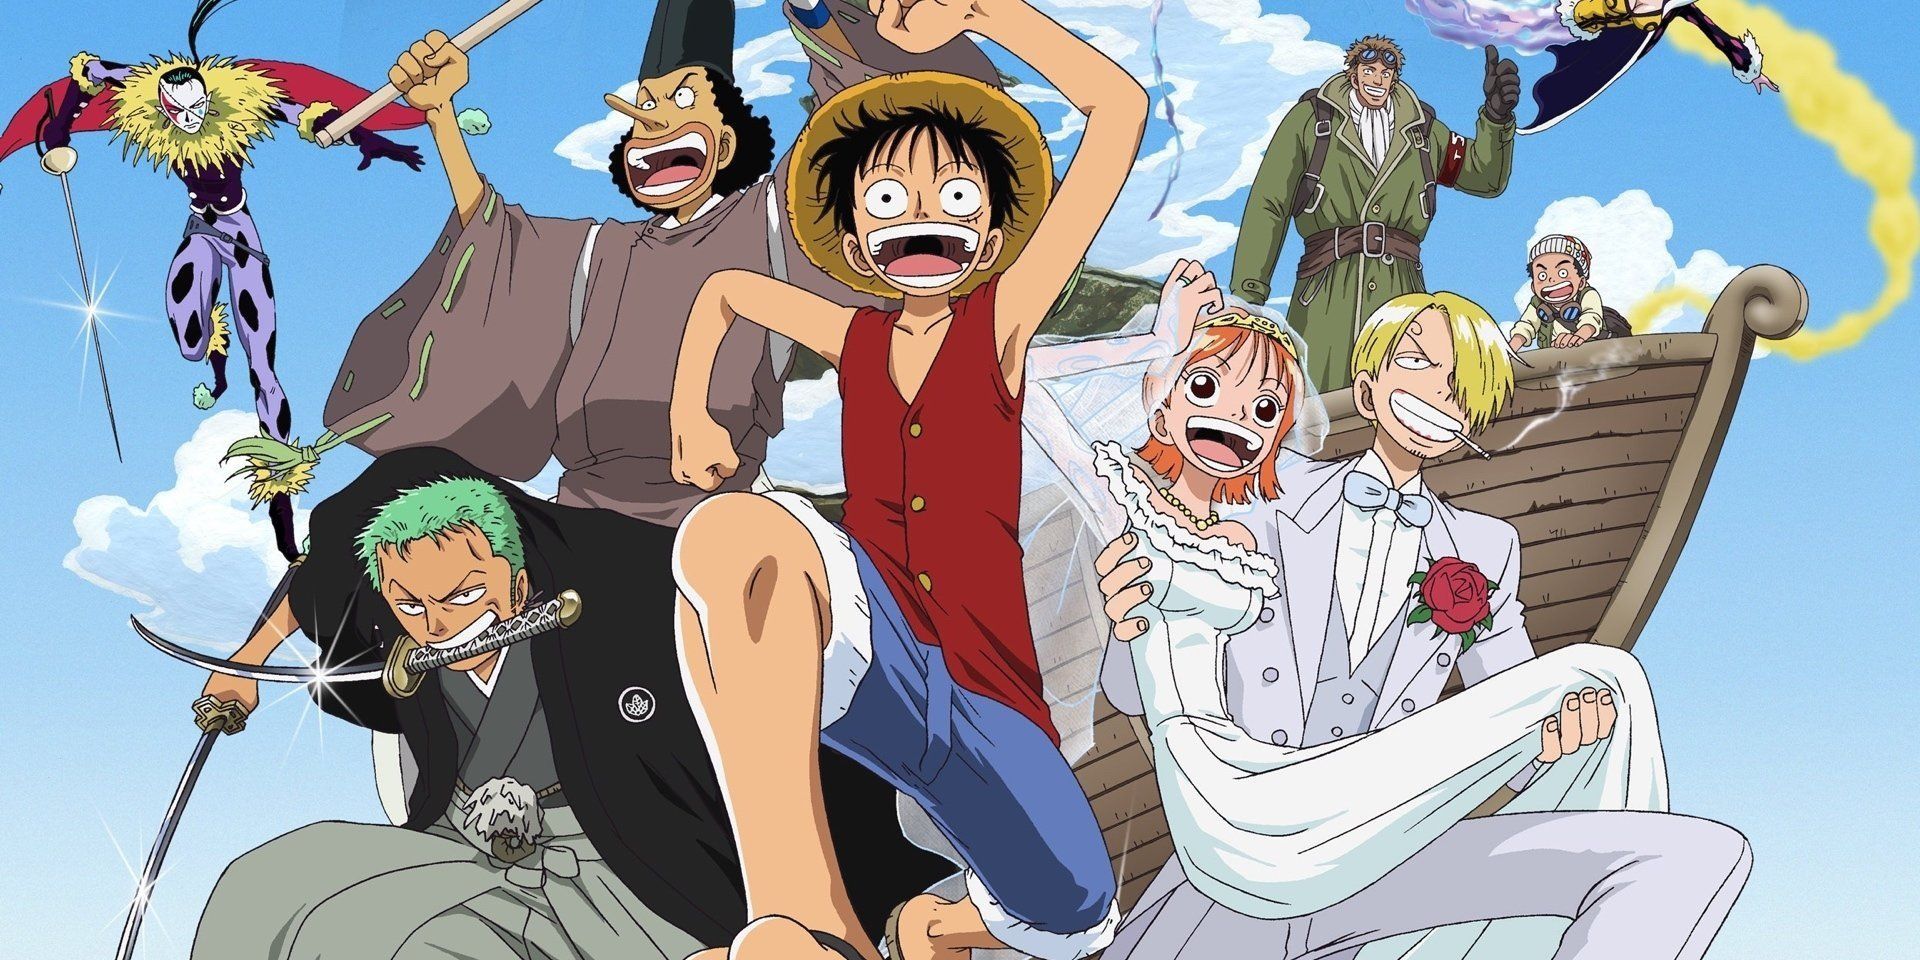 Netflix's One Piece series fixes the anime's biggest flaw: the pacing